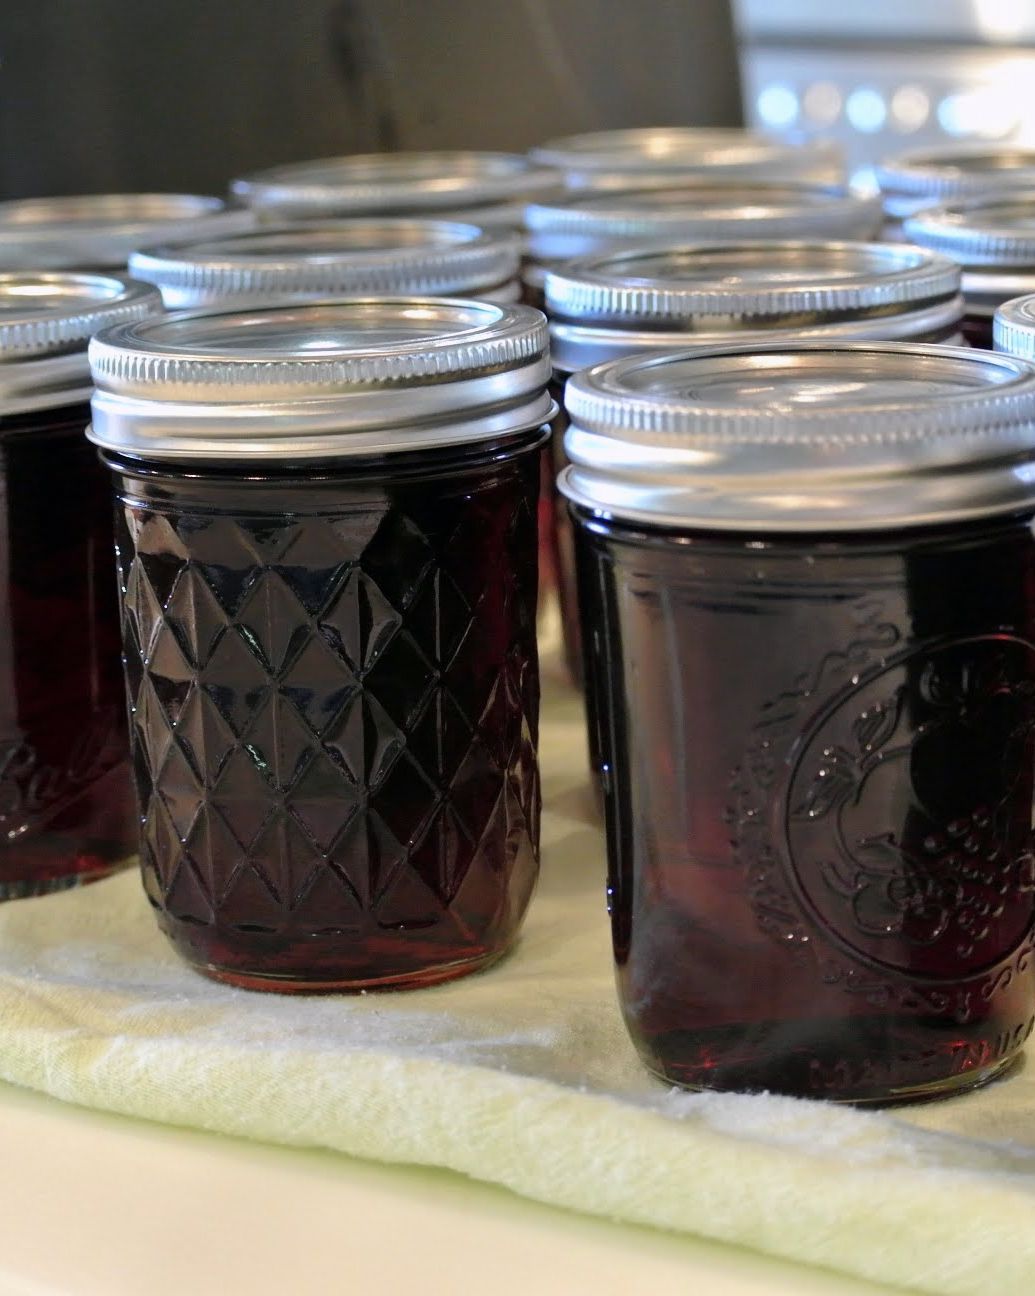 The Finished Product -- Fresh Preserves!